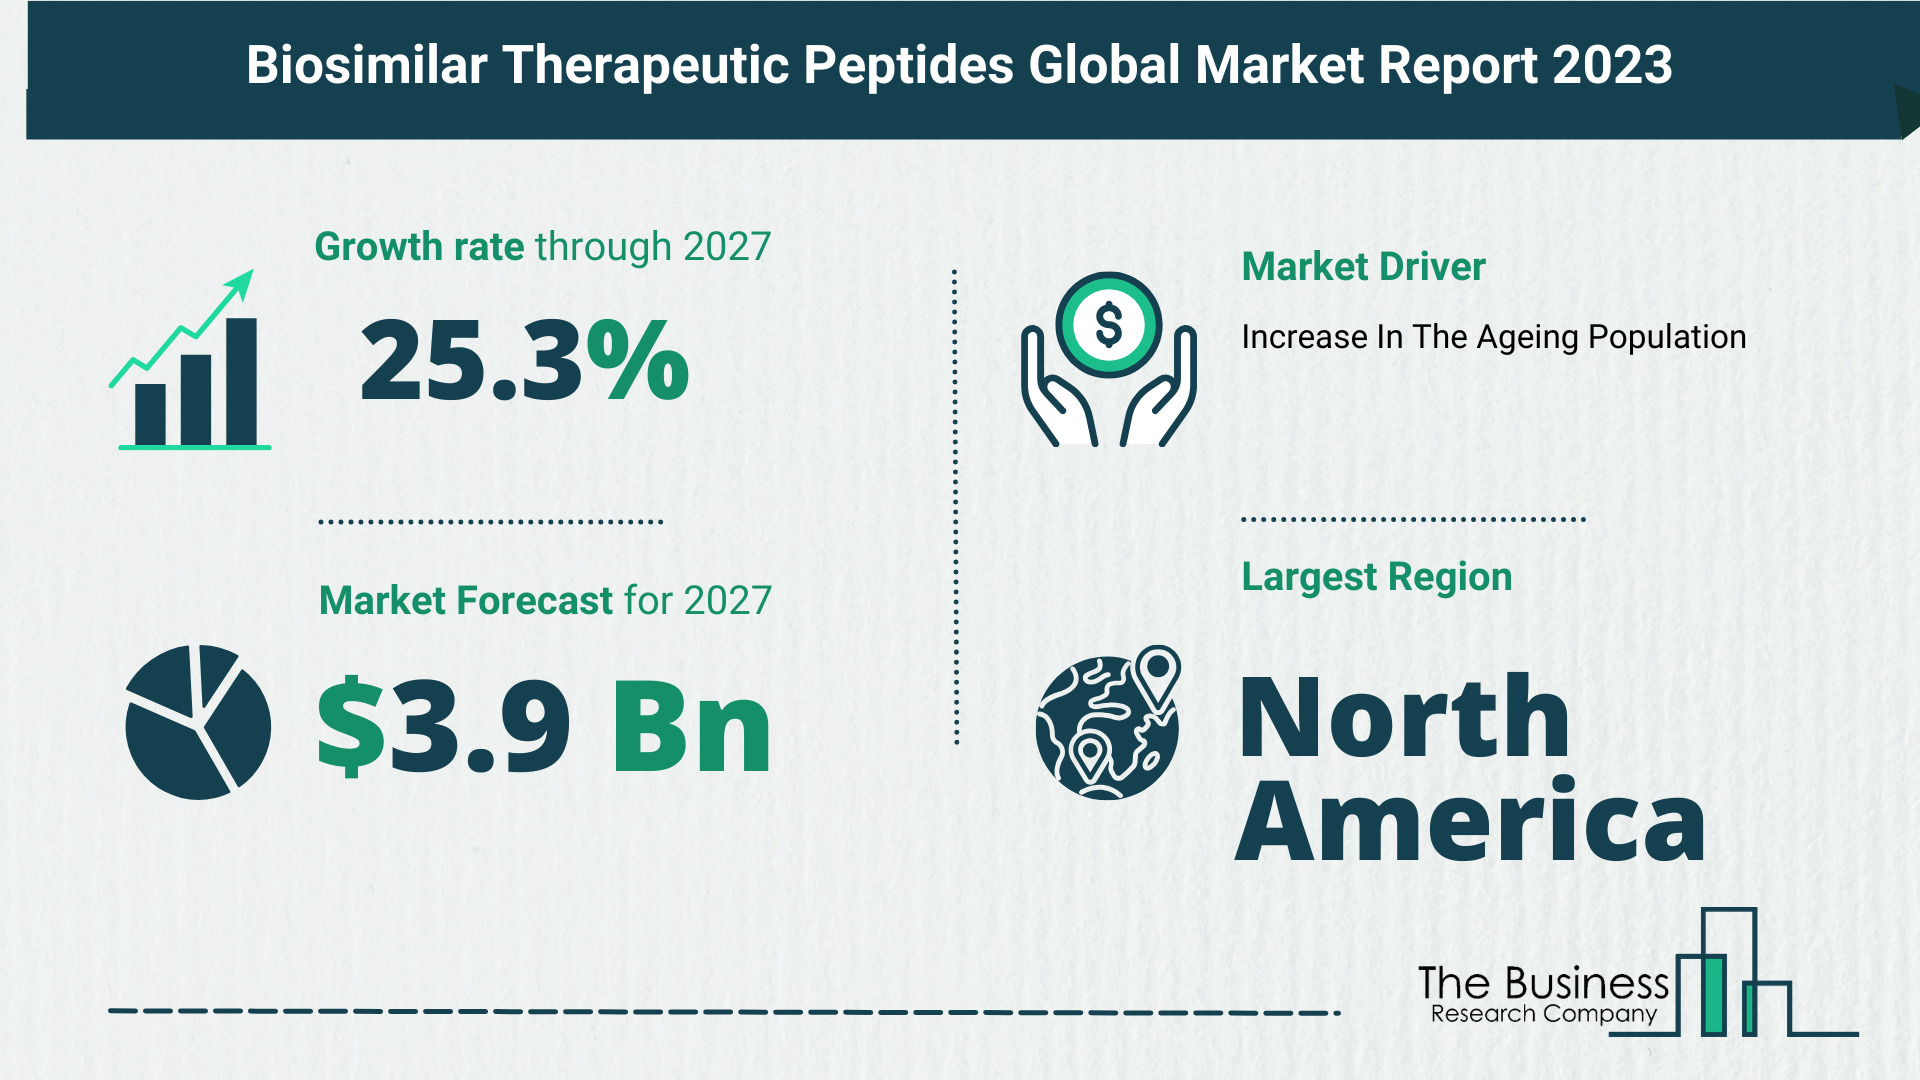 Global Biosimilar Therapeutic Peptides Market Analysis 2023: Size, Share, And Key Trends